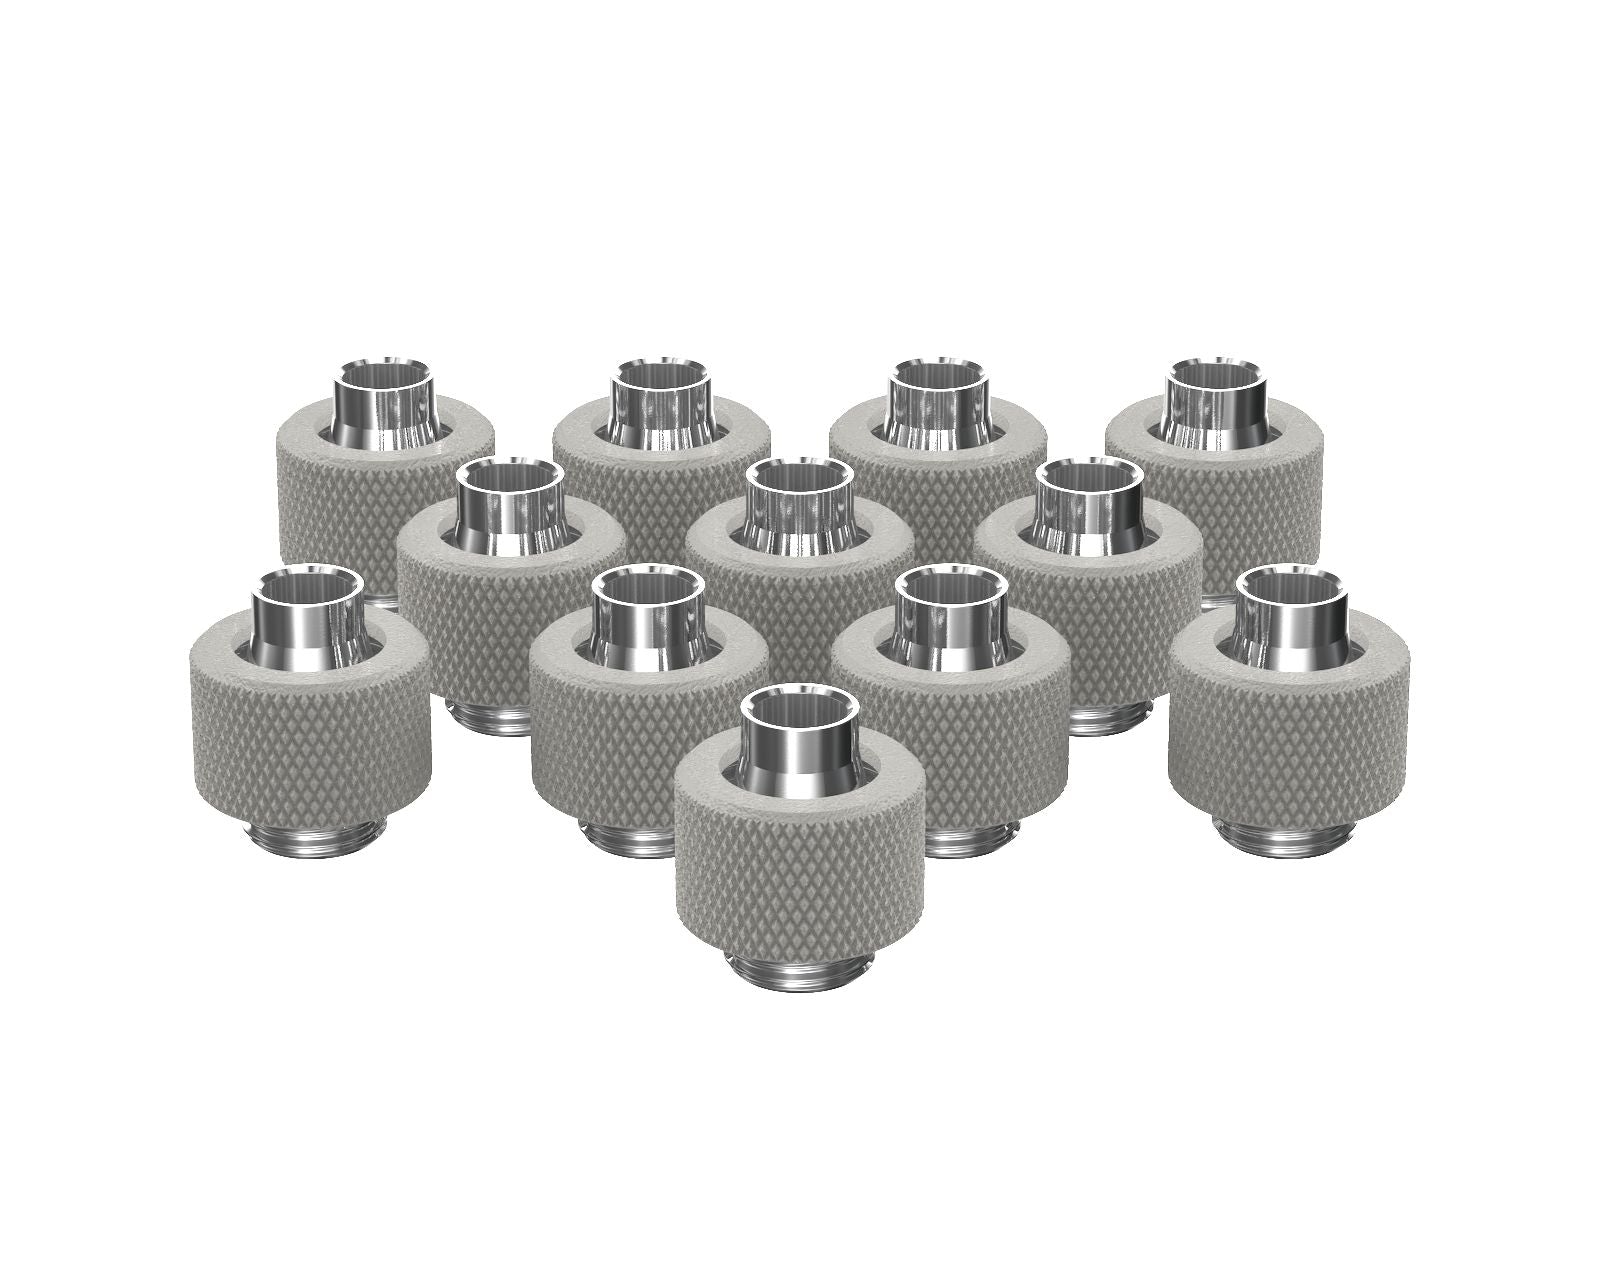 PrimoChill SecureFit SX - Premium Compression Fitting For 3/8in ID x 1/2in OD Flexible Tubing 12 Pack (F-SFSX12-12) - Available in 20+ Colors, Custom Watercooling Loop Ready - TX Matte Silver